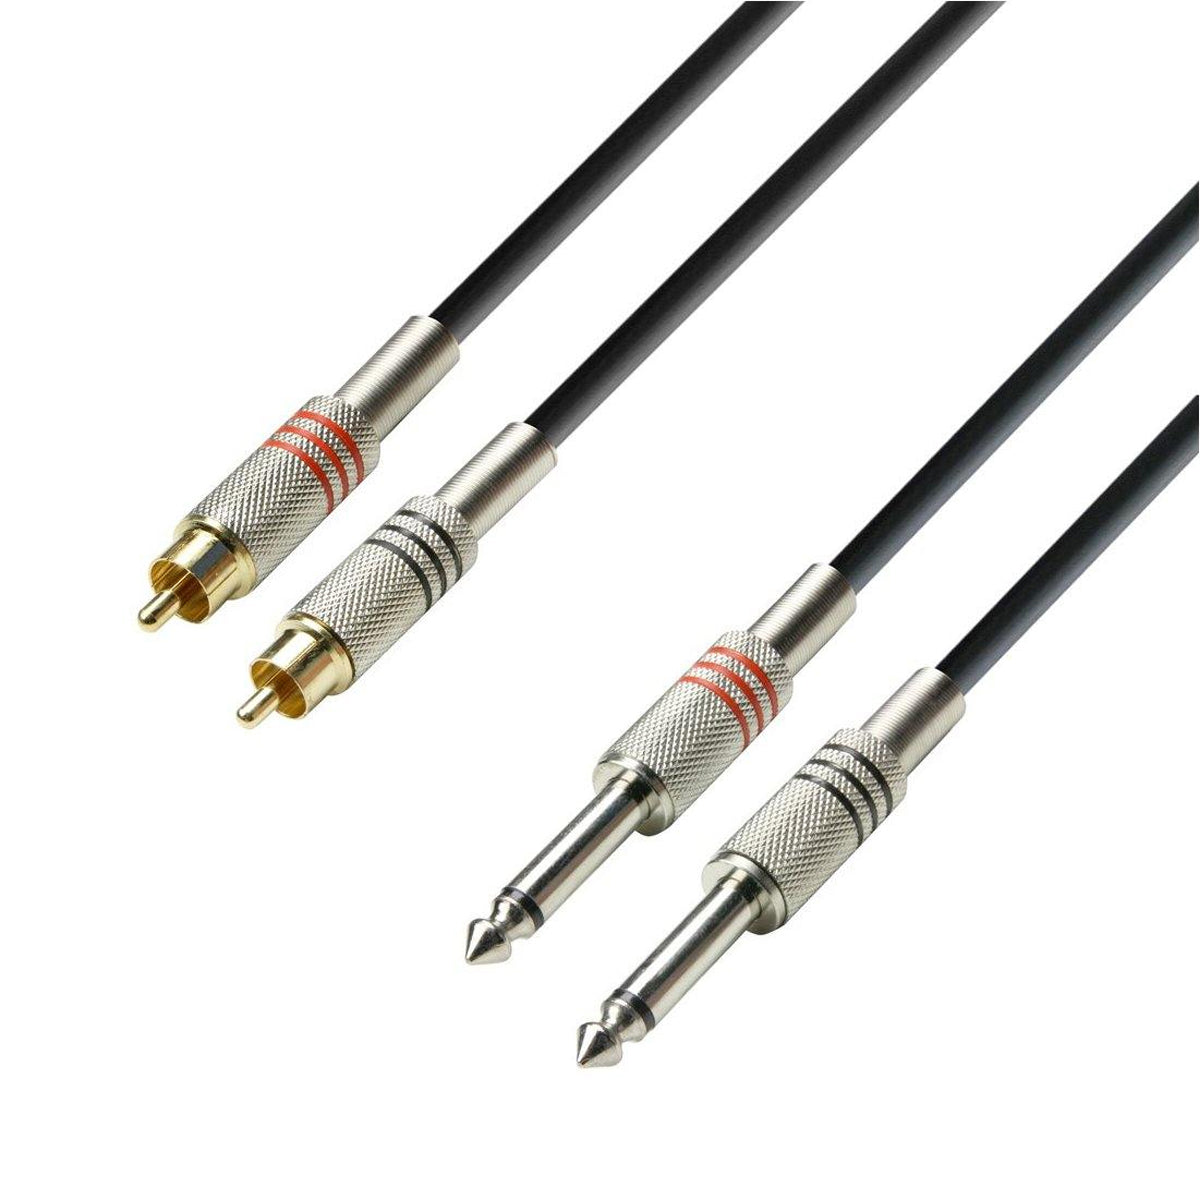 Adam Hall Cables K3 TPC 0300 - Audio Cable 2 x RCA male to 2 x 6.3mm Jack mono 3m